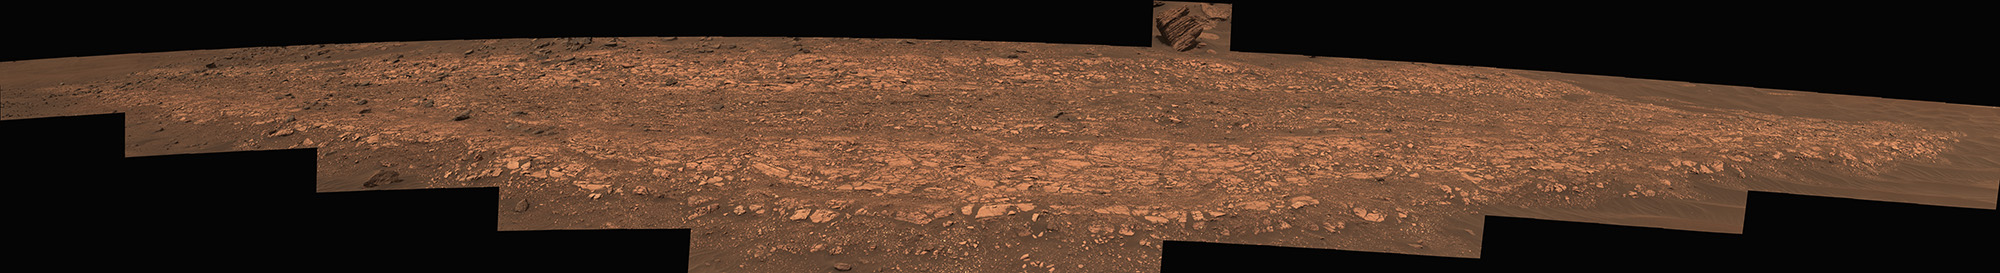 Figure A shows an enhanced color image of “Hogwallow Flats” on June 6, 2022, the 461st Martian day, or sol, of the mission.